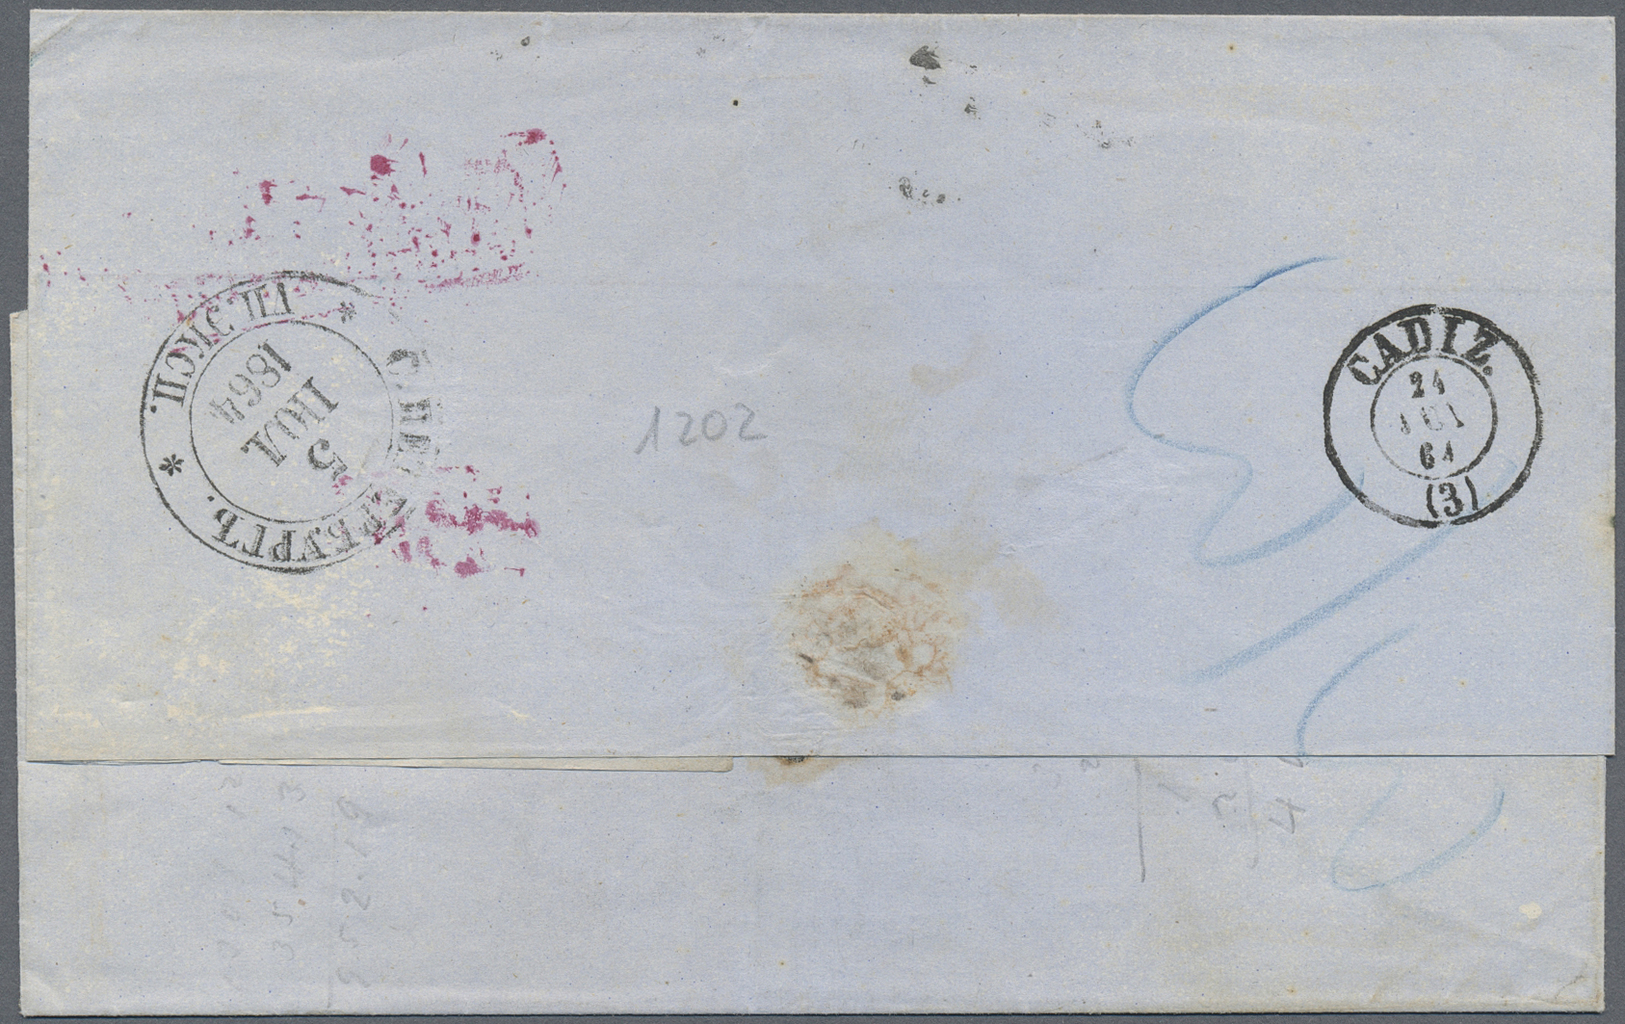 Br Russland: 1864. Stampless Envelope Written From St. Petersburg Dated 'July 4th 1864' Addressed To Cadiz With D - Unused Stamps